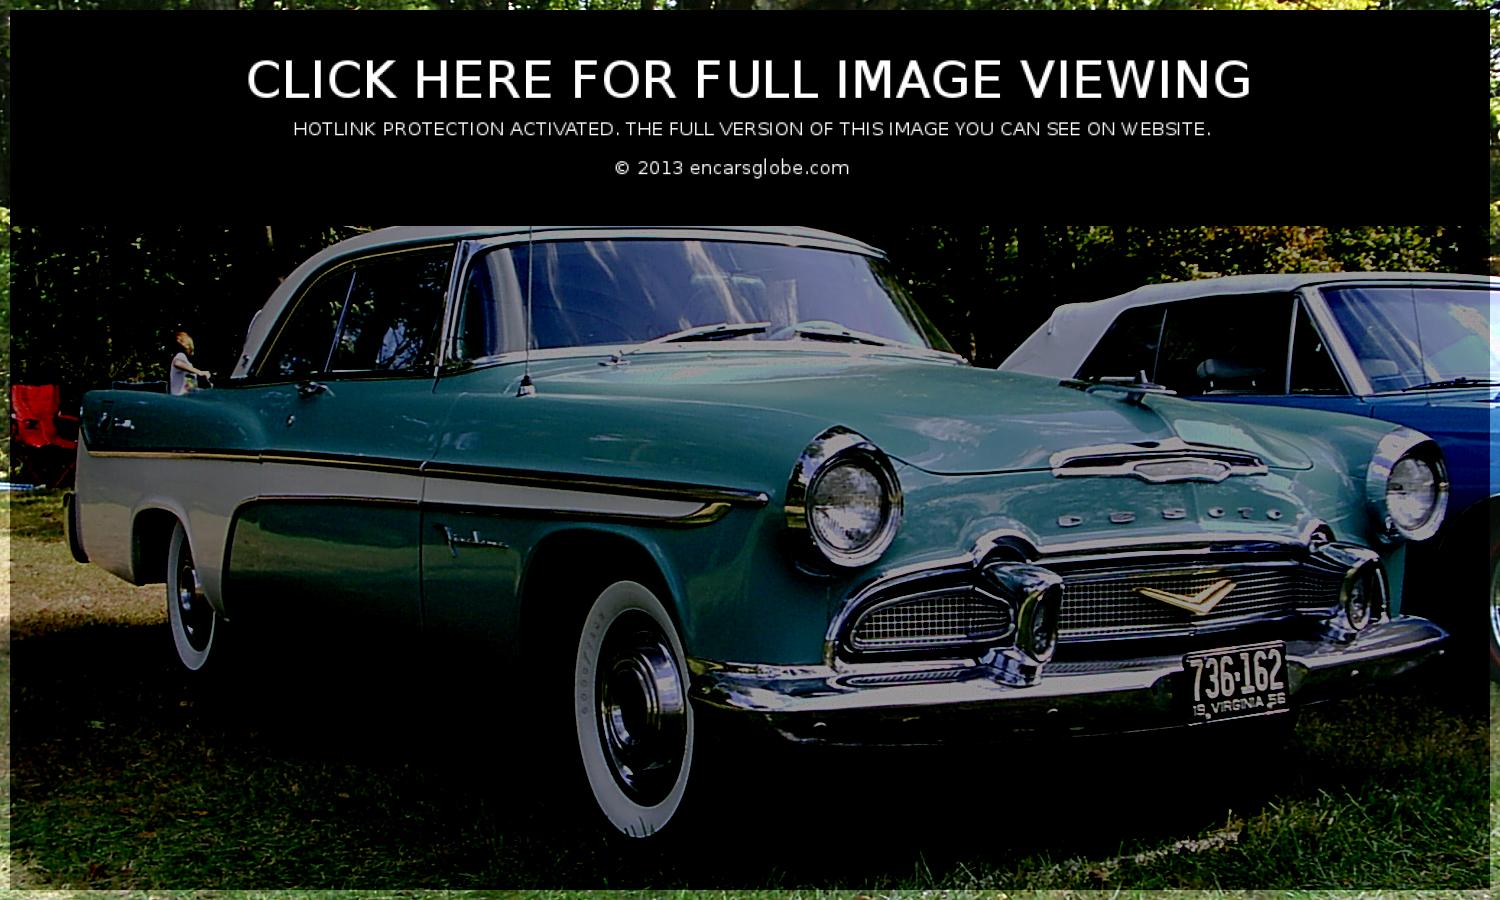 De Soto AS 900 Photo Gallery: Photo #02 out of 8, Image Size ...